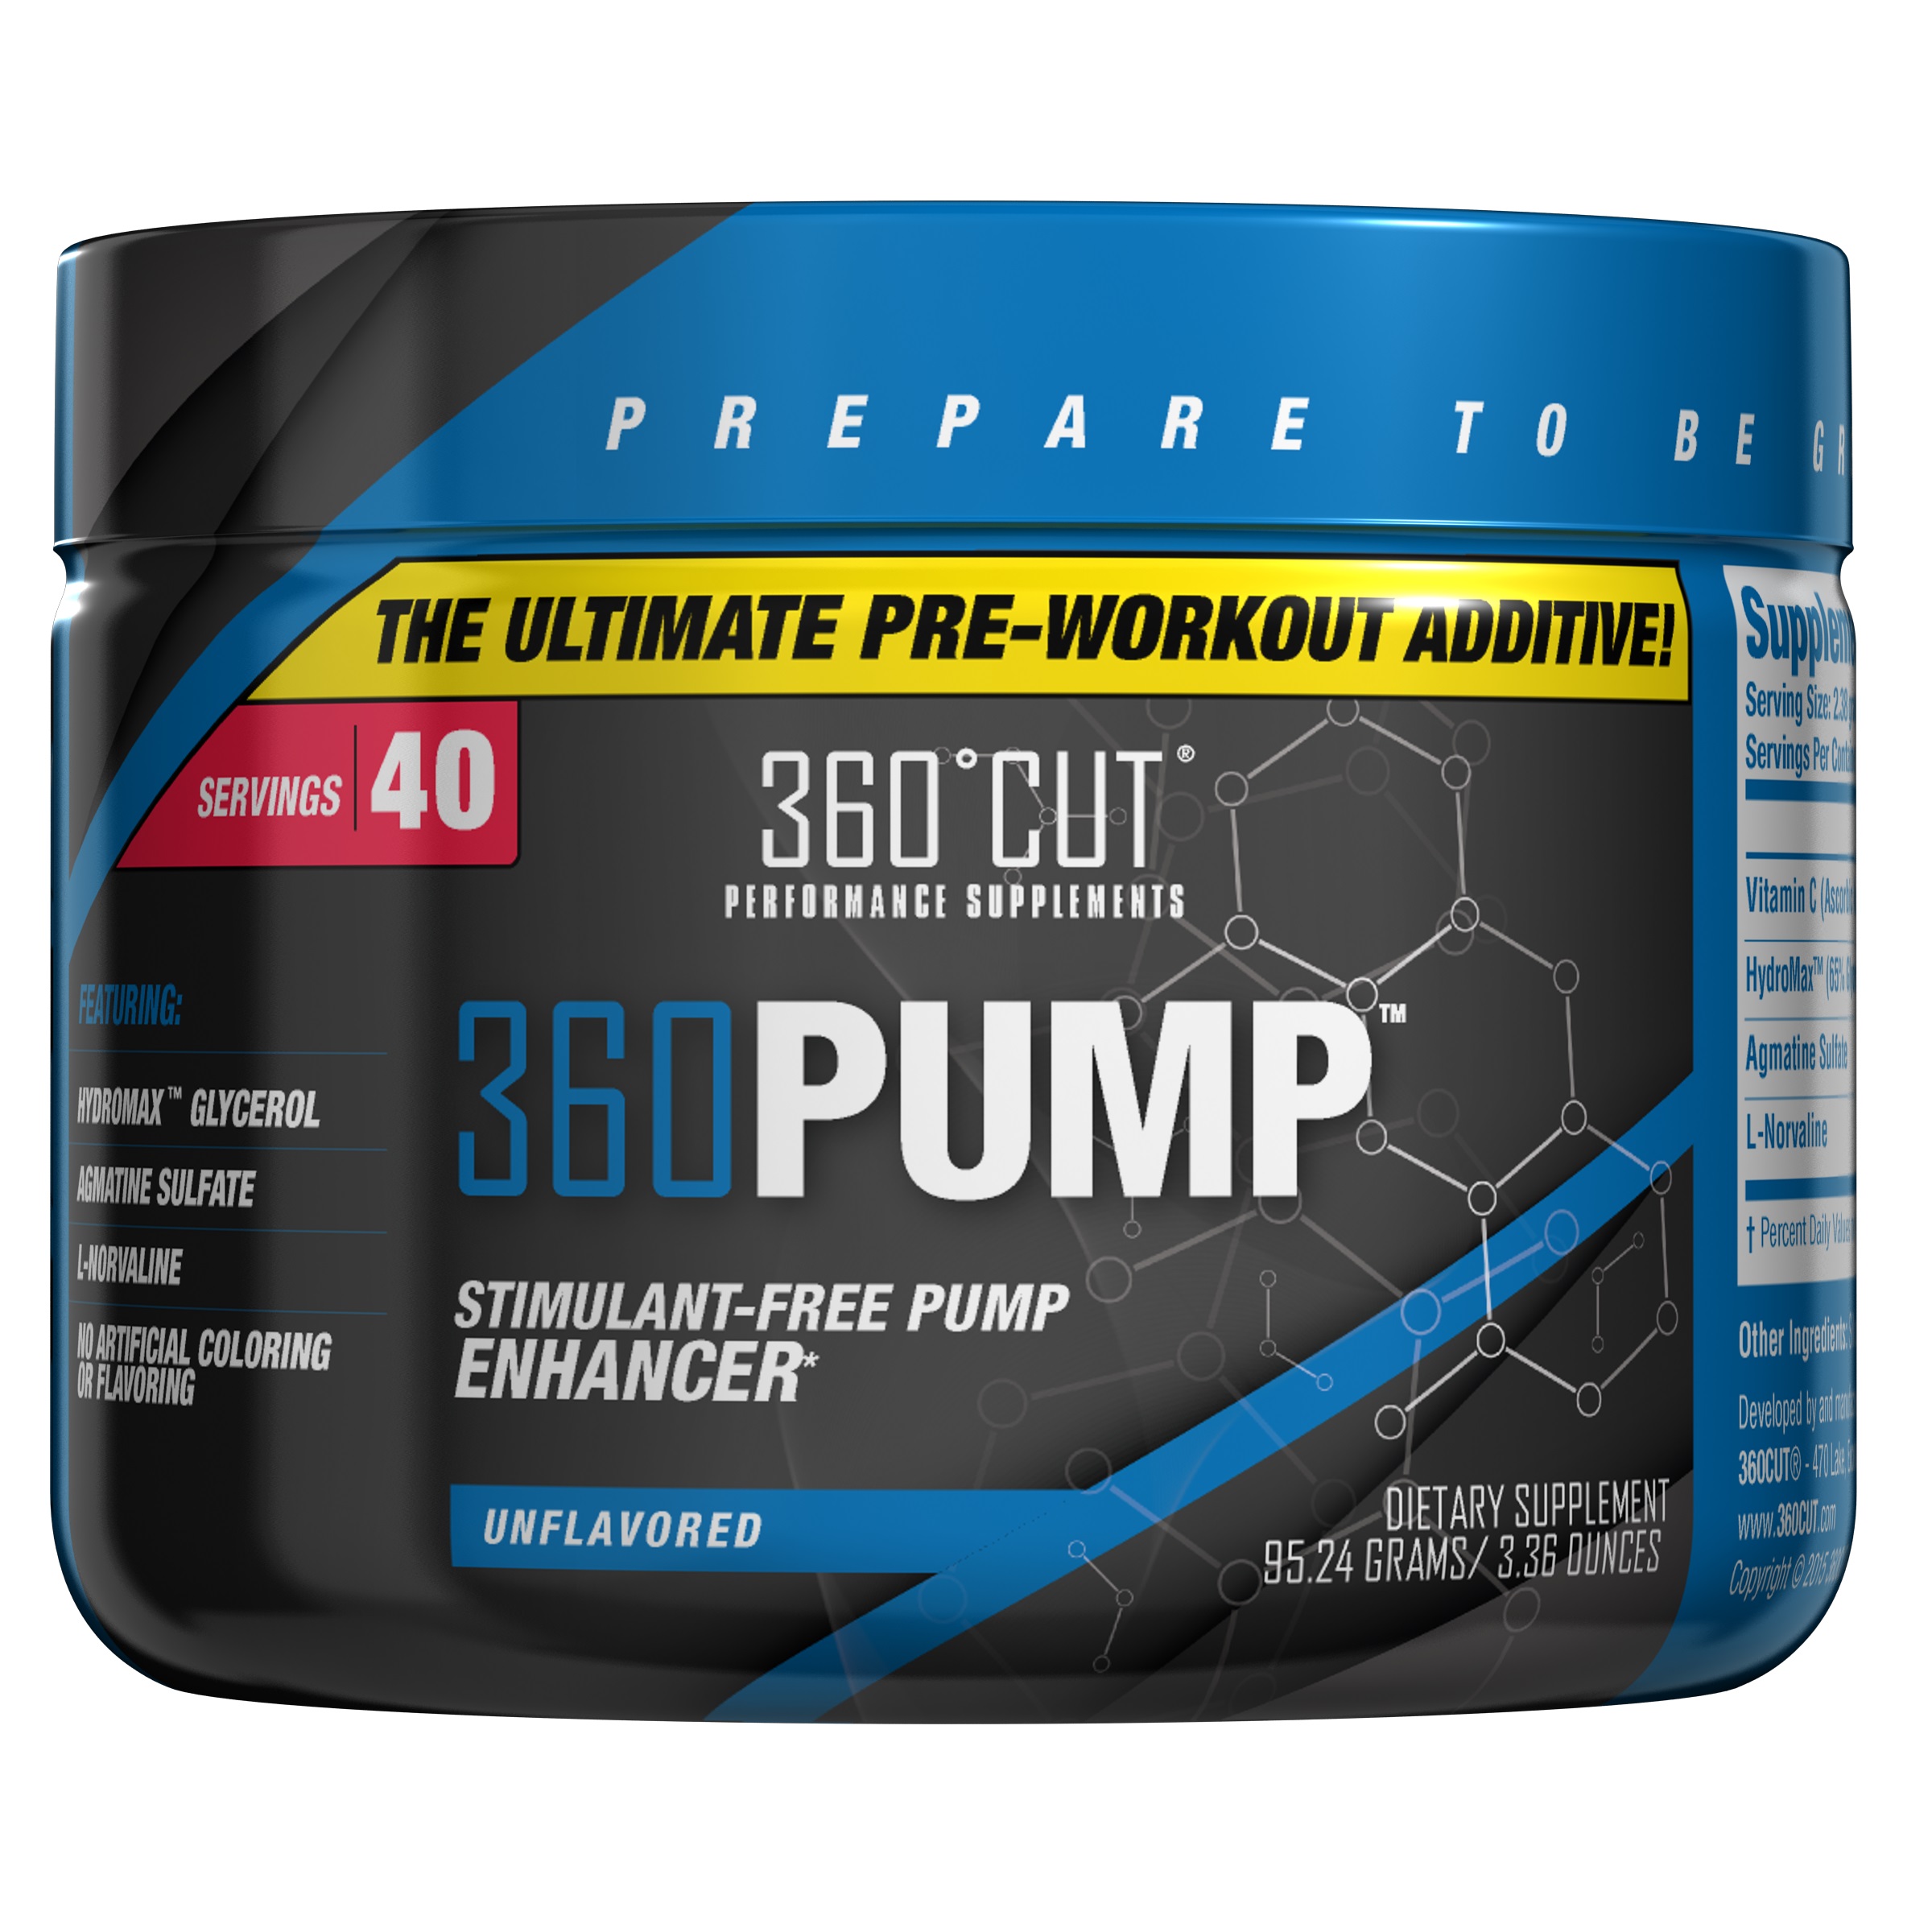 6 Day What Gives You The Pump In Pre Workout for Build Muscle